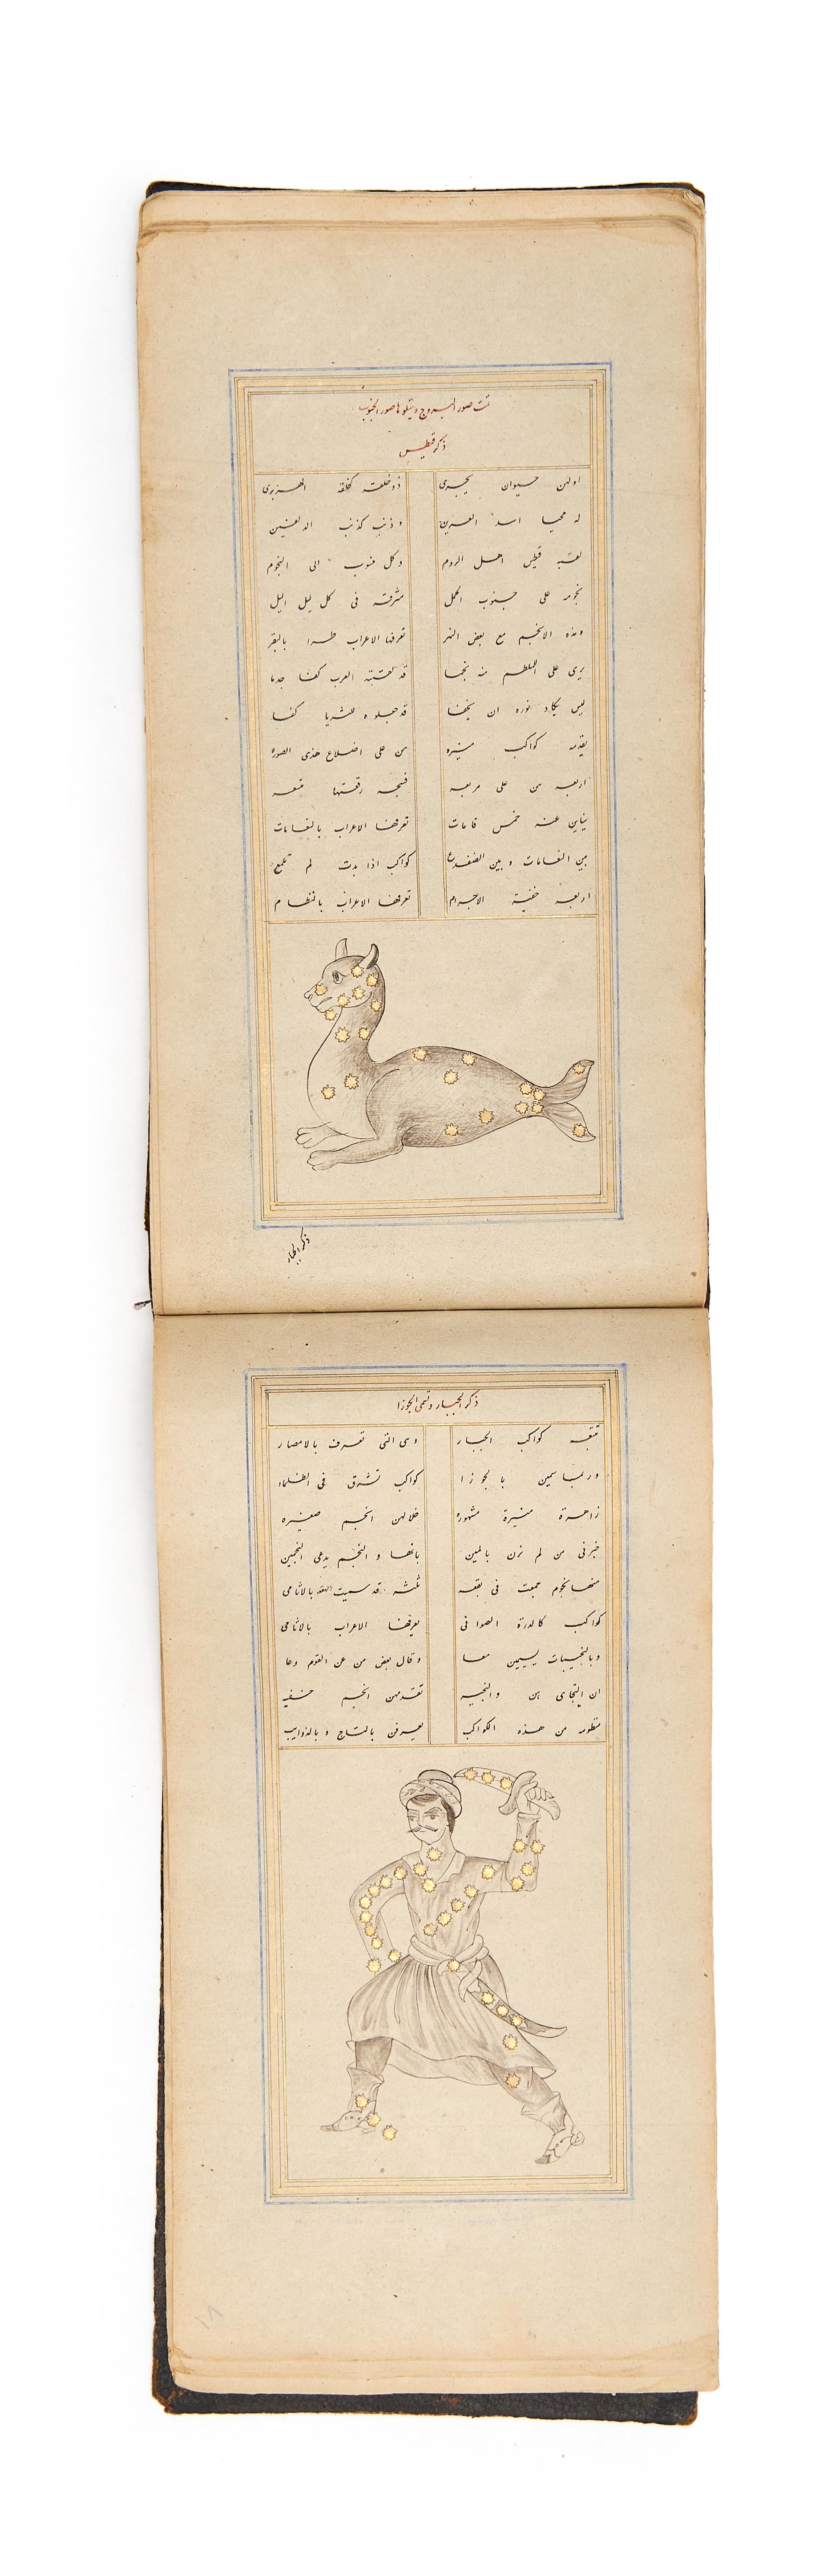 A RARE ILLUMINATED & ILLUSTRATED PERSIAN POETRY BOOK, ABD AL RAHMAN IN SUFI TEXT, LATE 17TH/ EARLY - Image 18 of 34